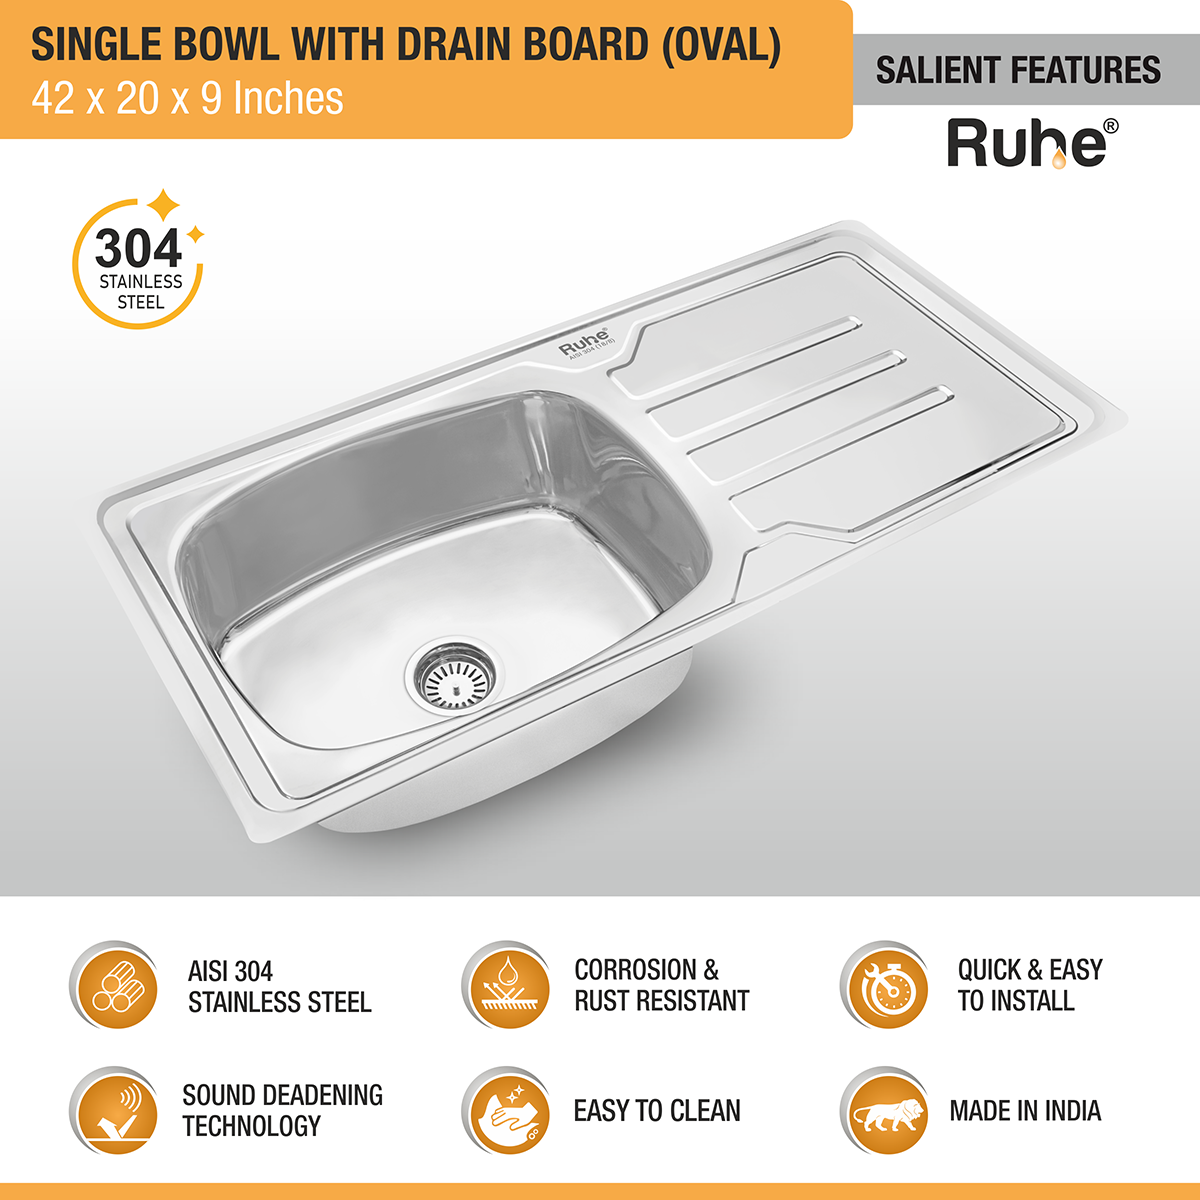 Oval Single Bowl (42 x 20 x 9 inches) 304-Grade Stainless Steel Kitchen Sink with Drainboard features and benefits